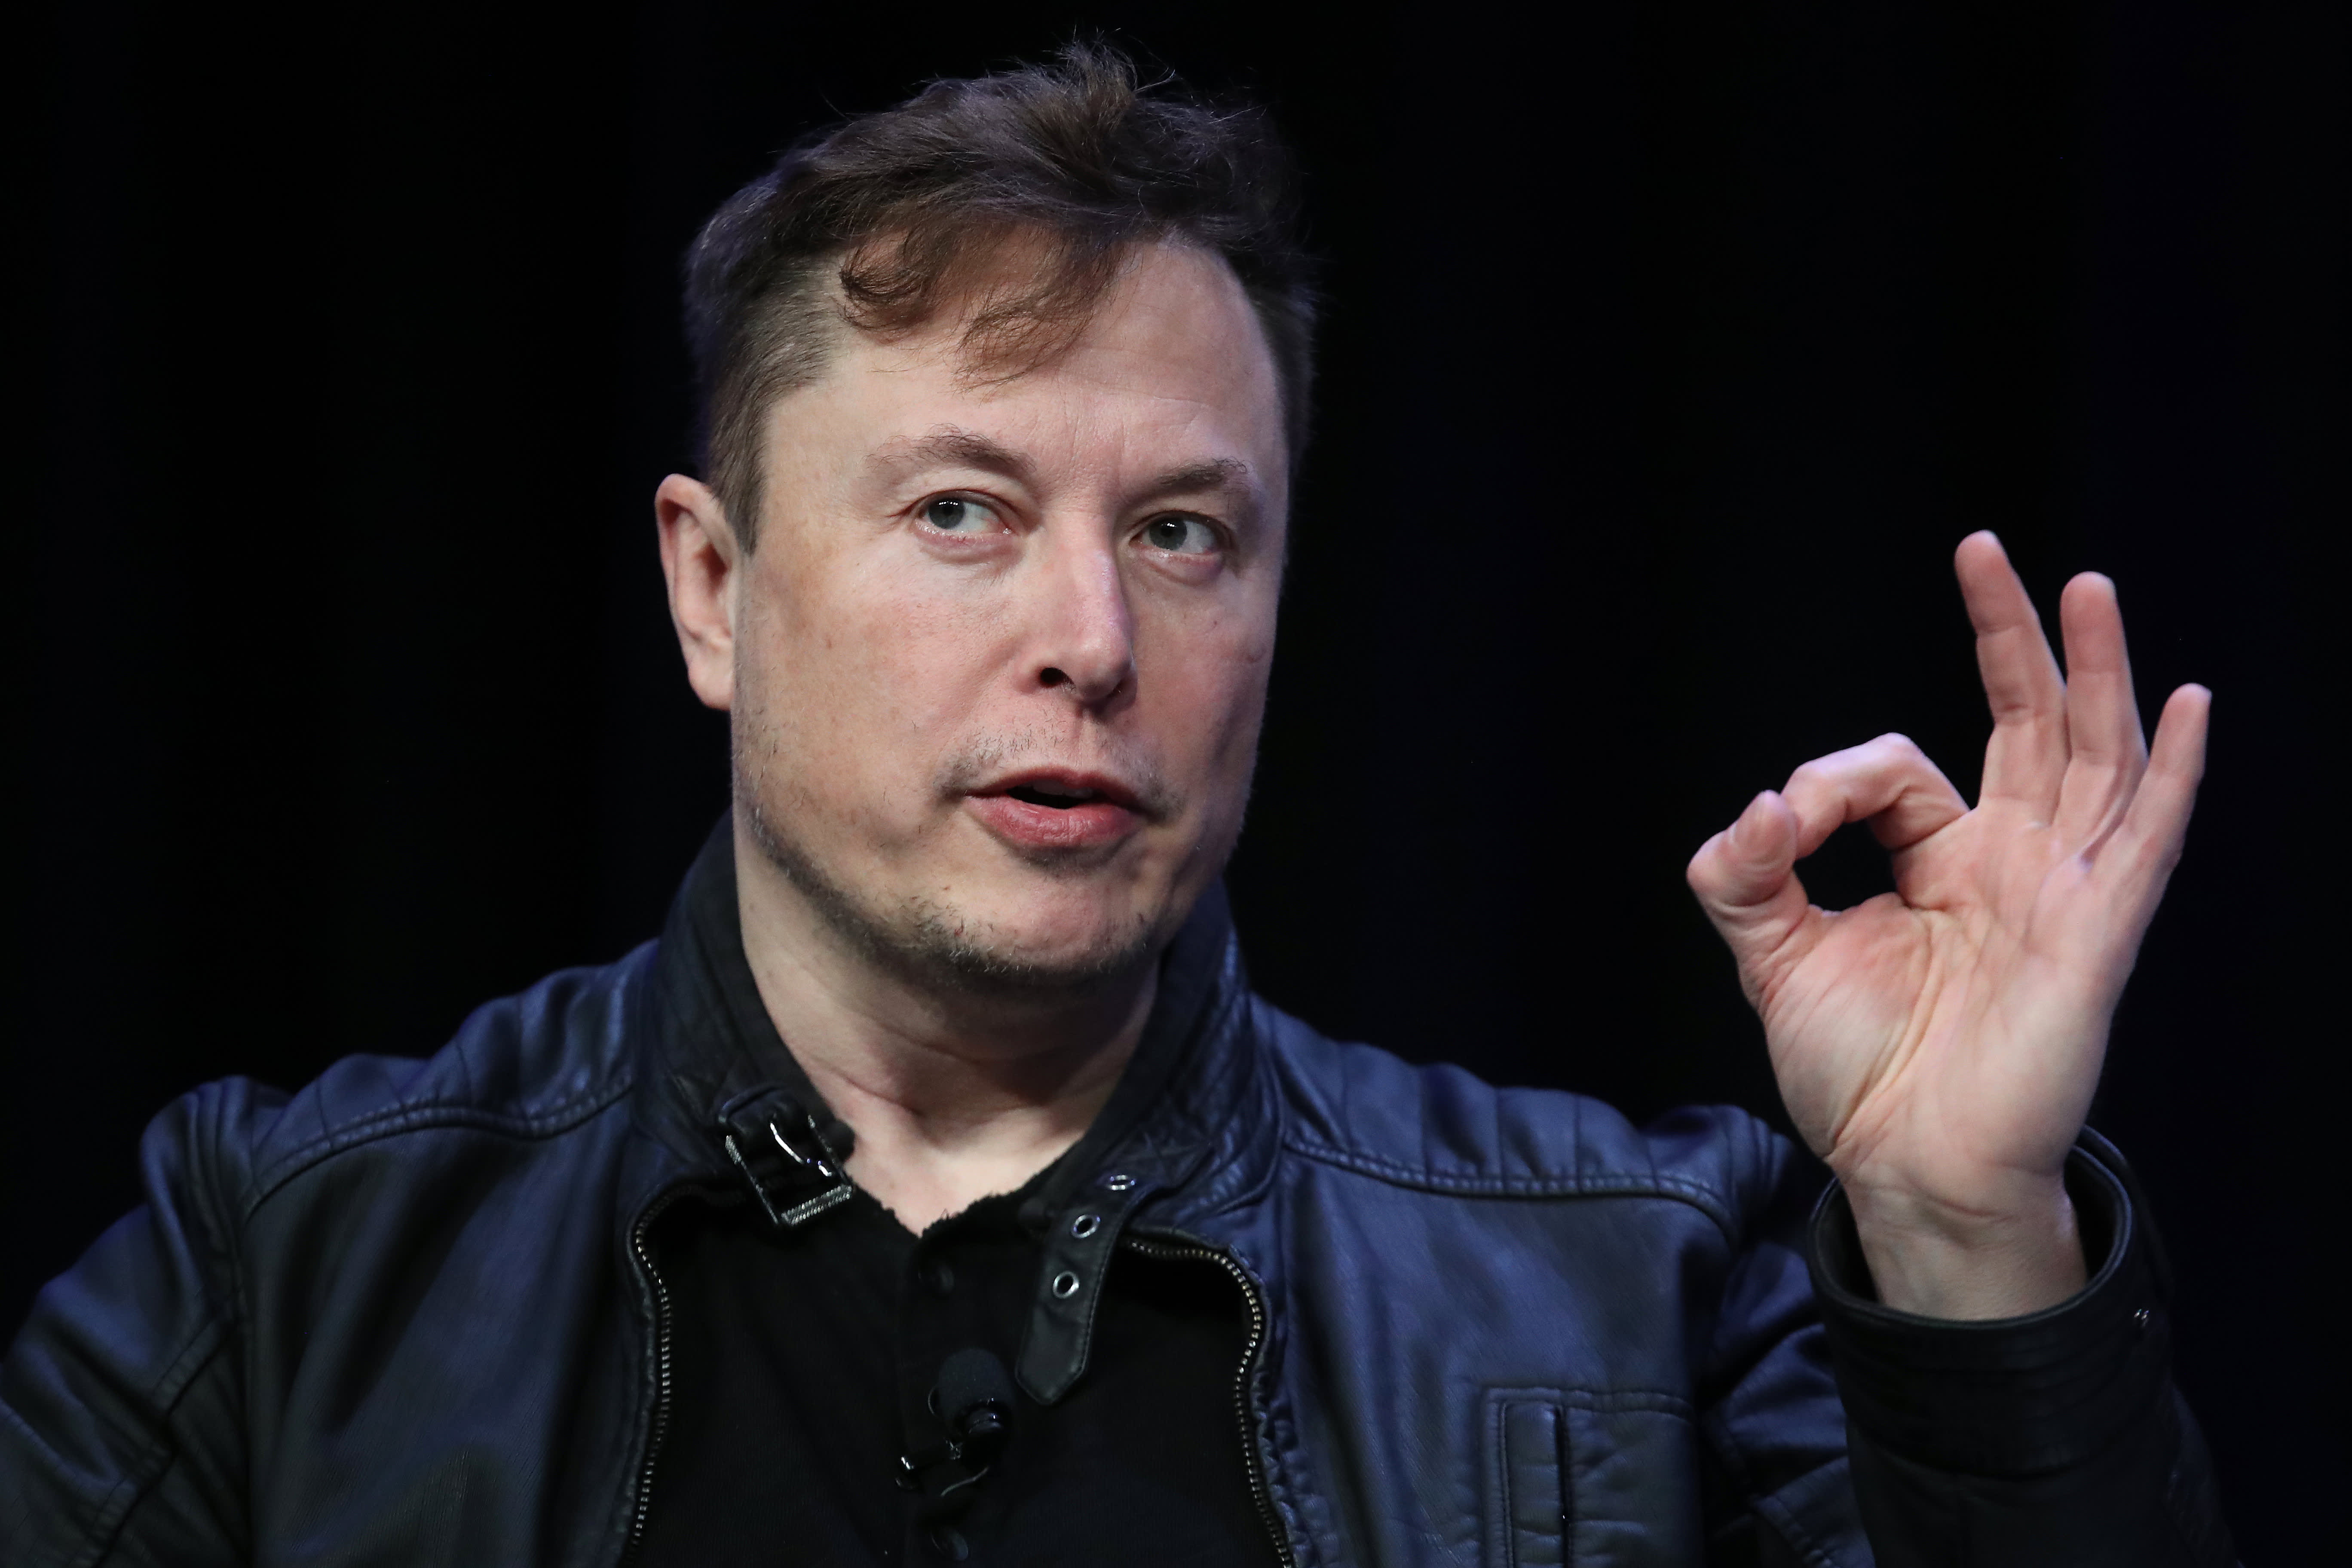 Elon Musk: 'My top recommendation' for reducing greenhouse gas emissions is a carbon tax